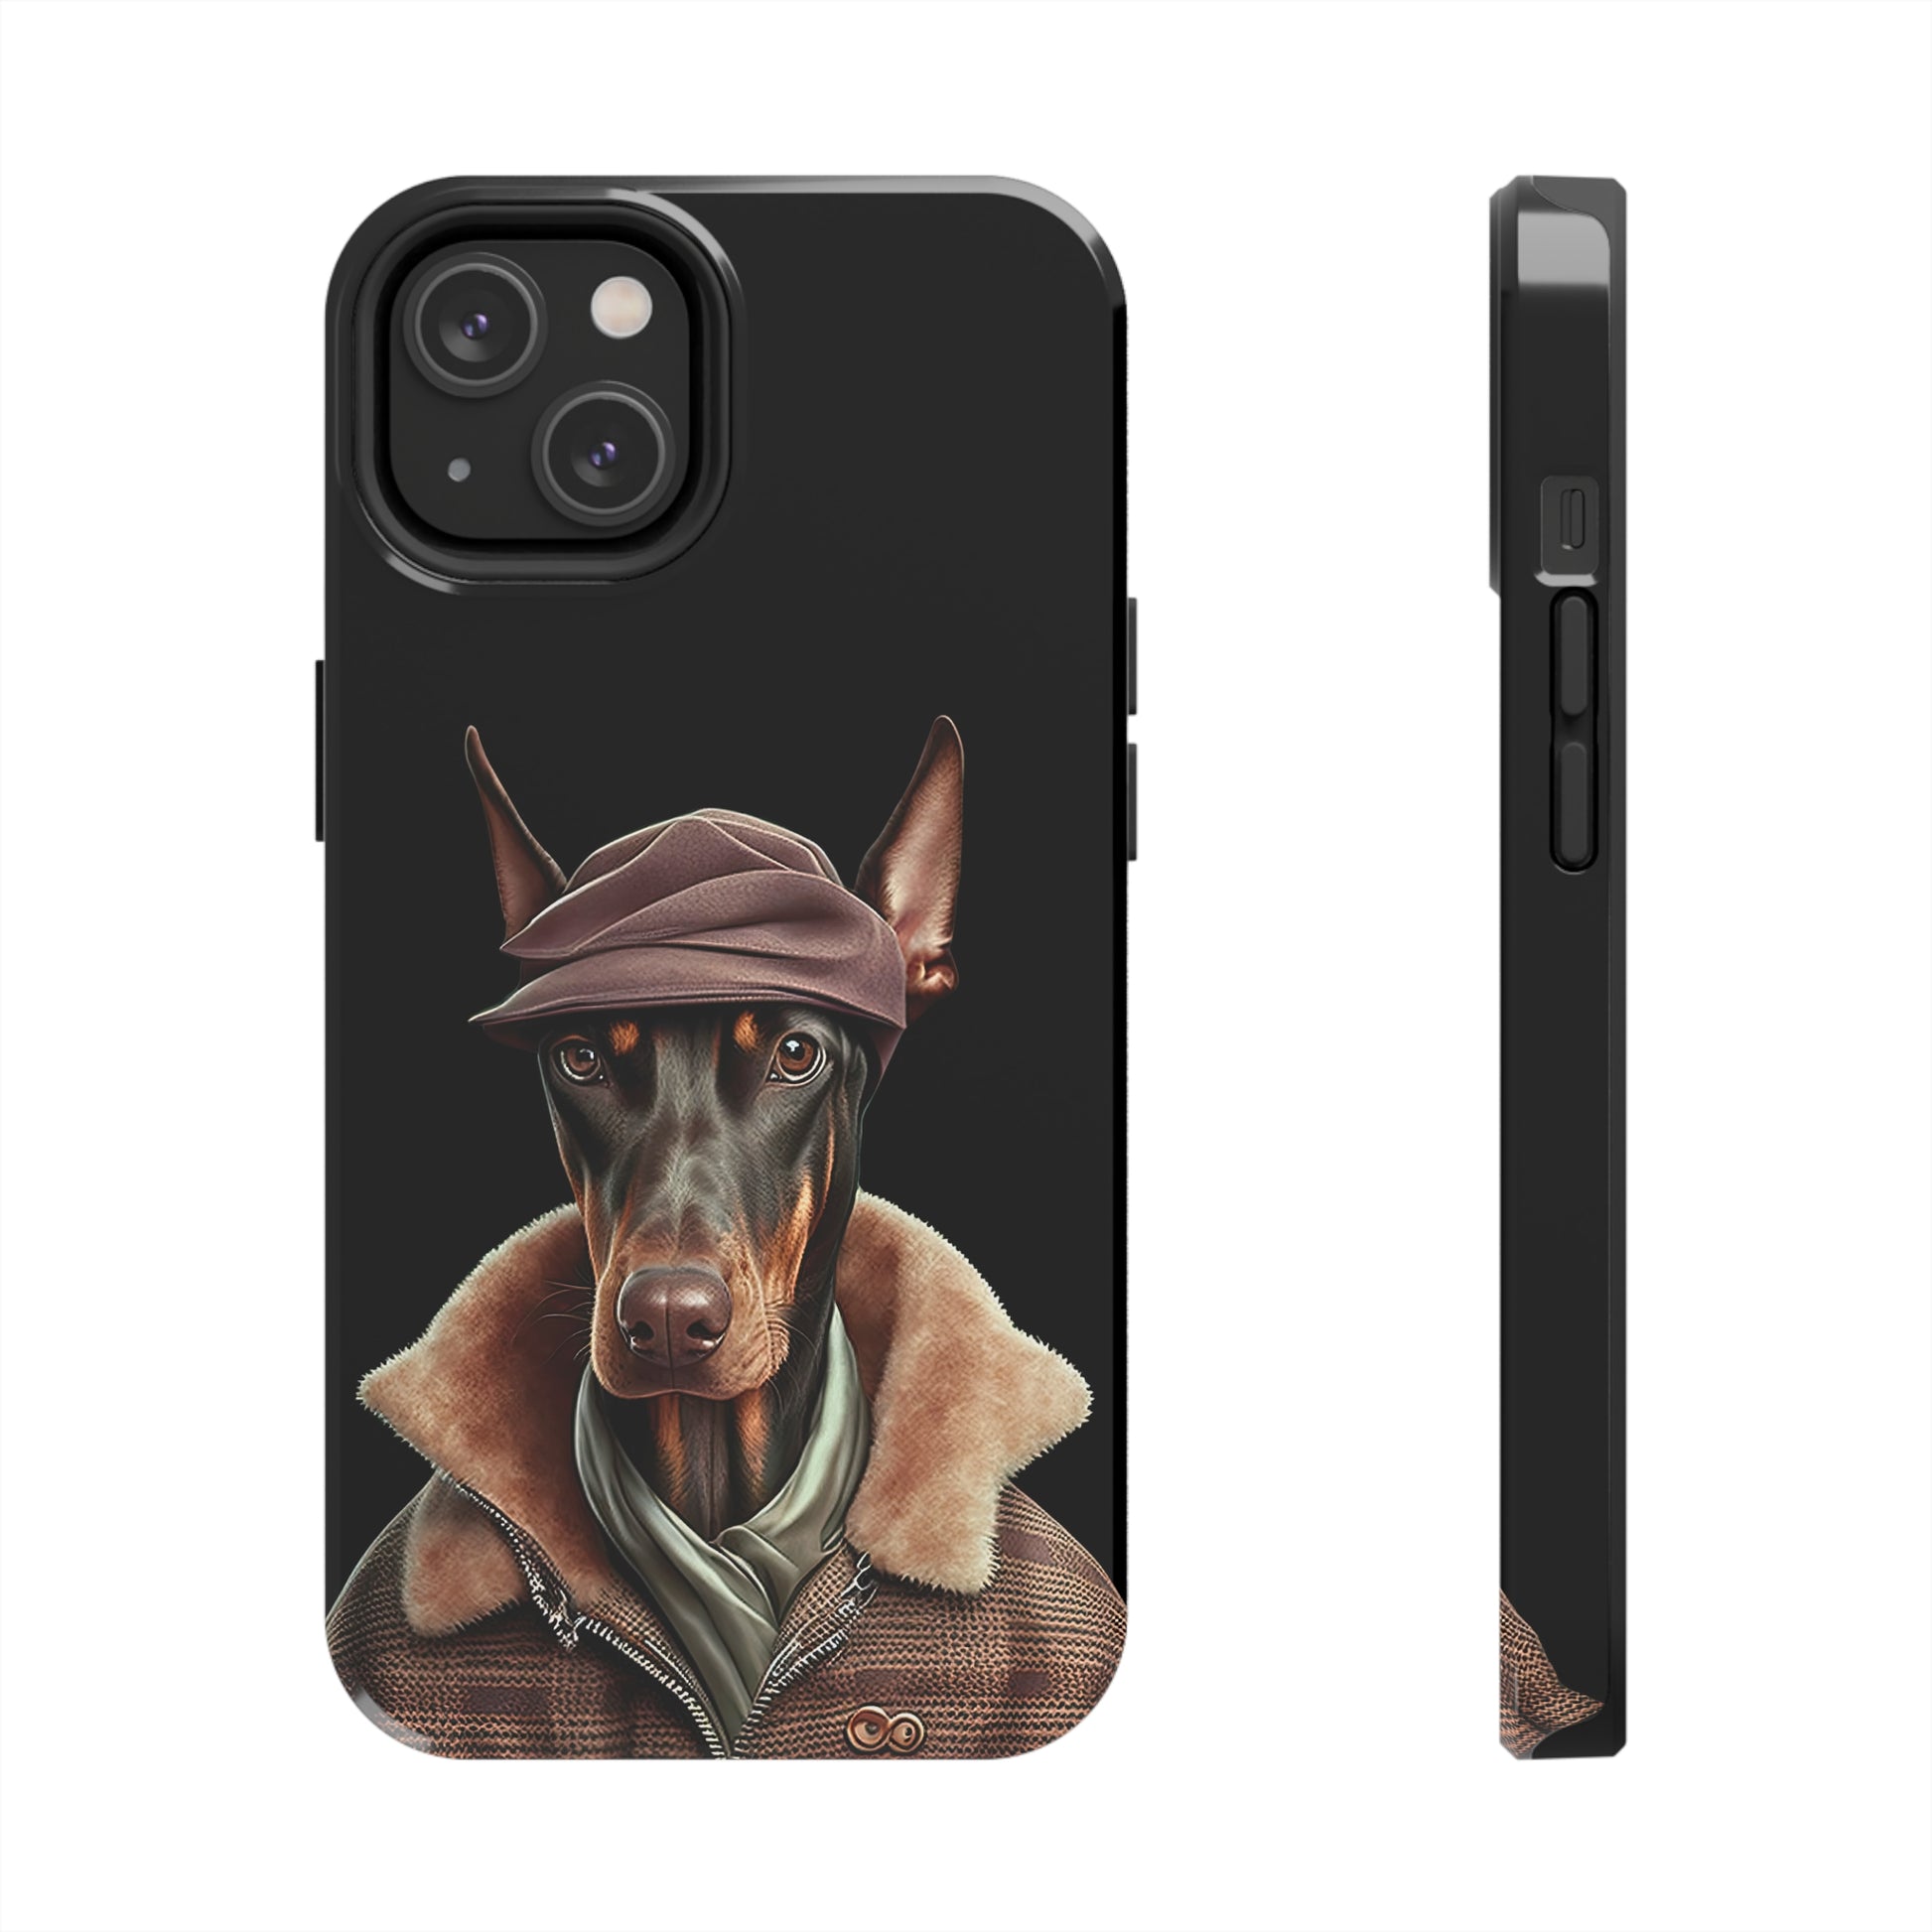 Horace Tough Phone Cases in USA - Shaggy Chic